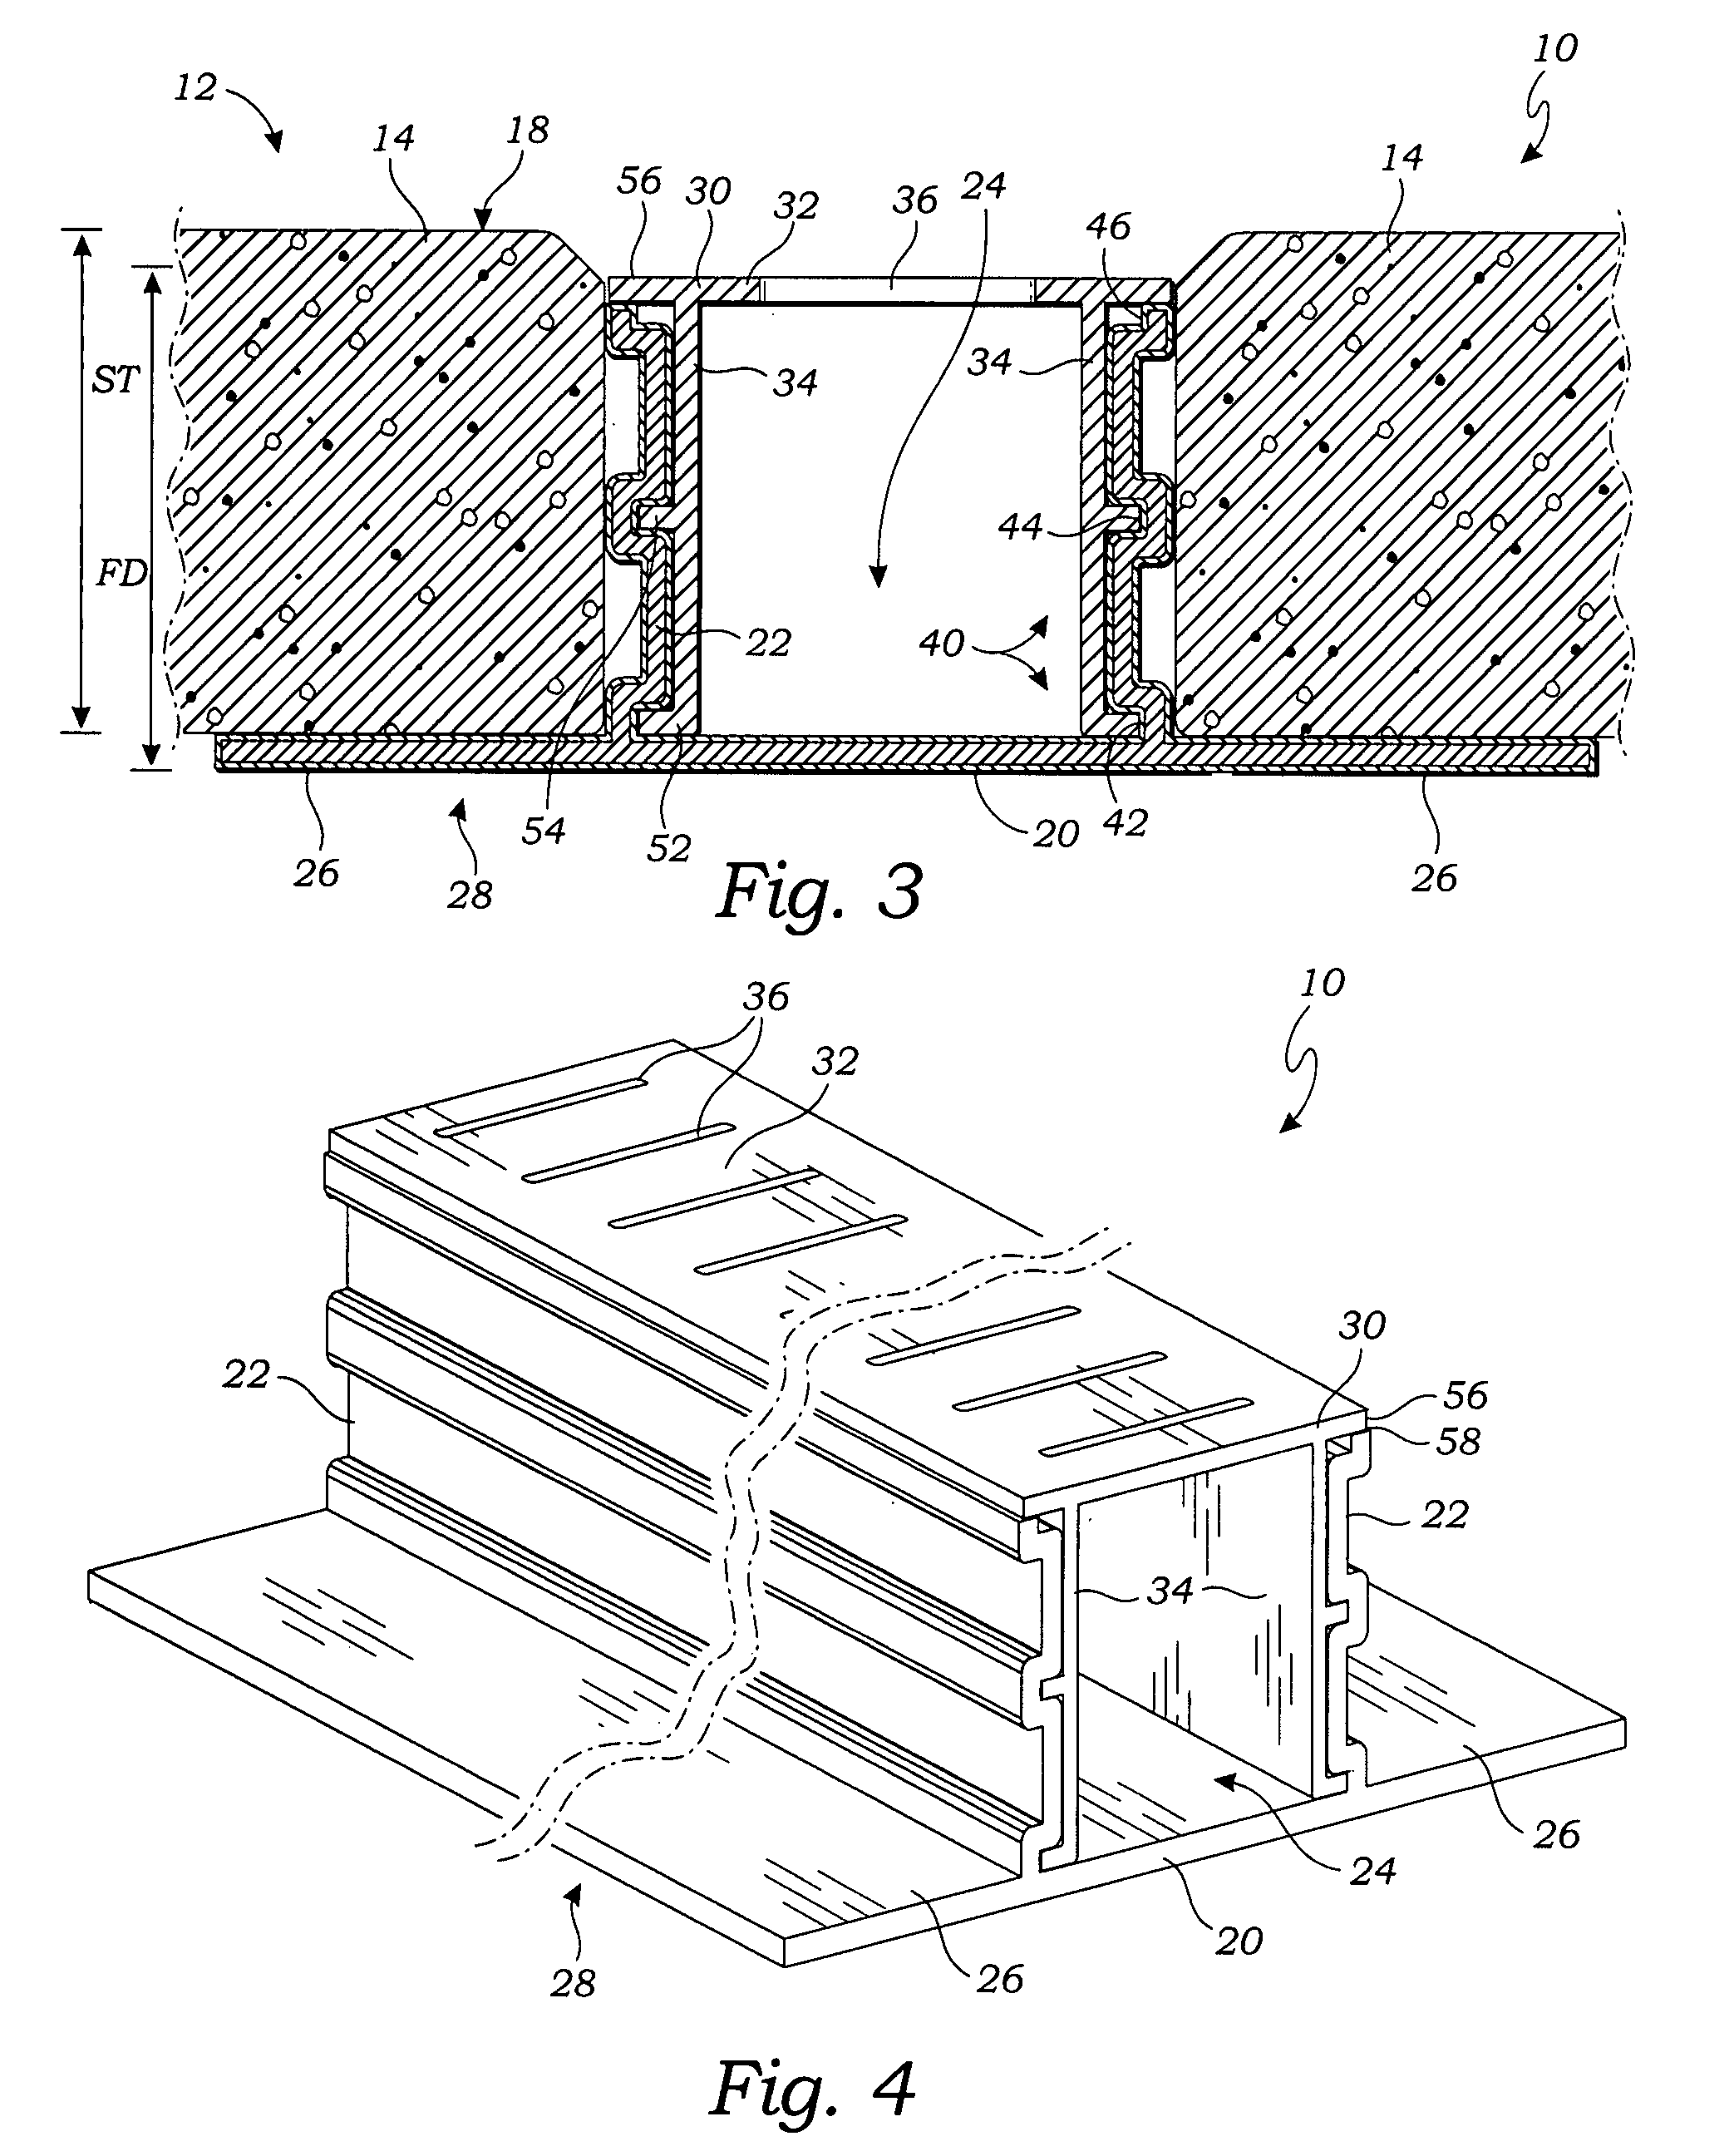 Adjustable drain for stone decking